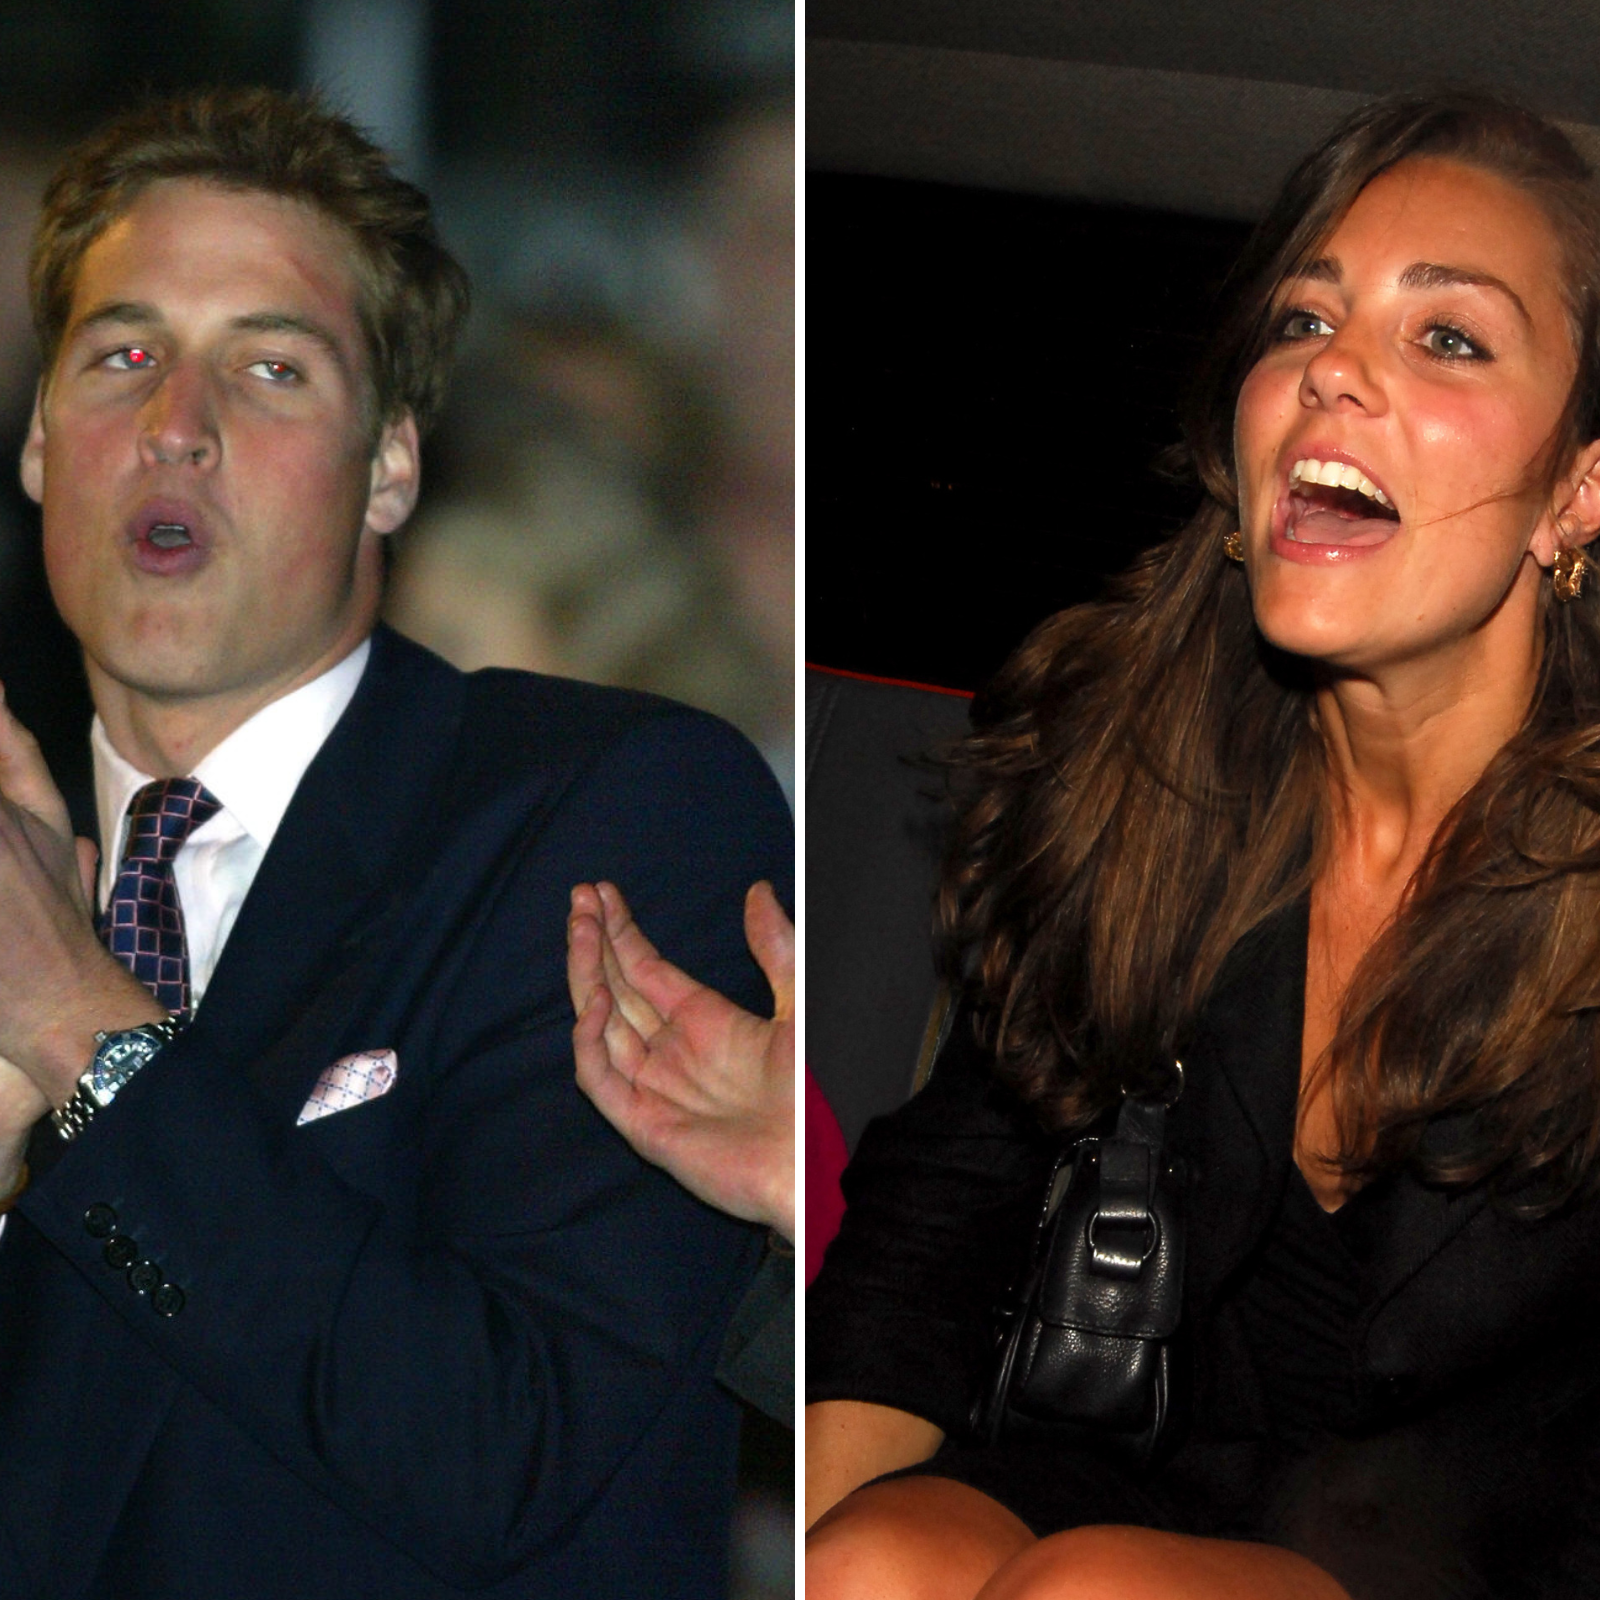 tabe klippe Rustik Clip of William, Kate 'Partying Like Normal Young People' Goes Viral